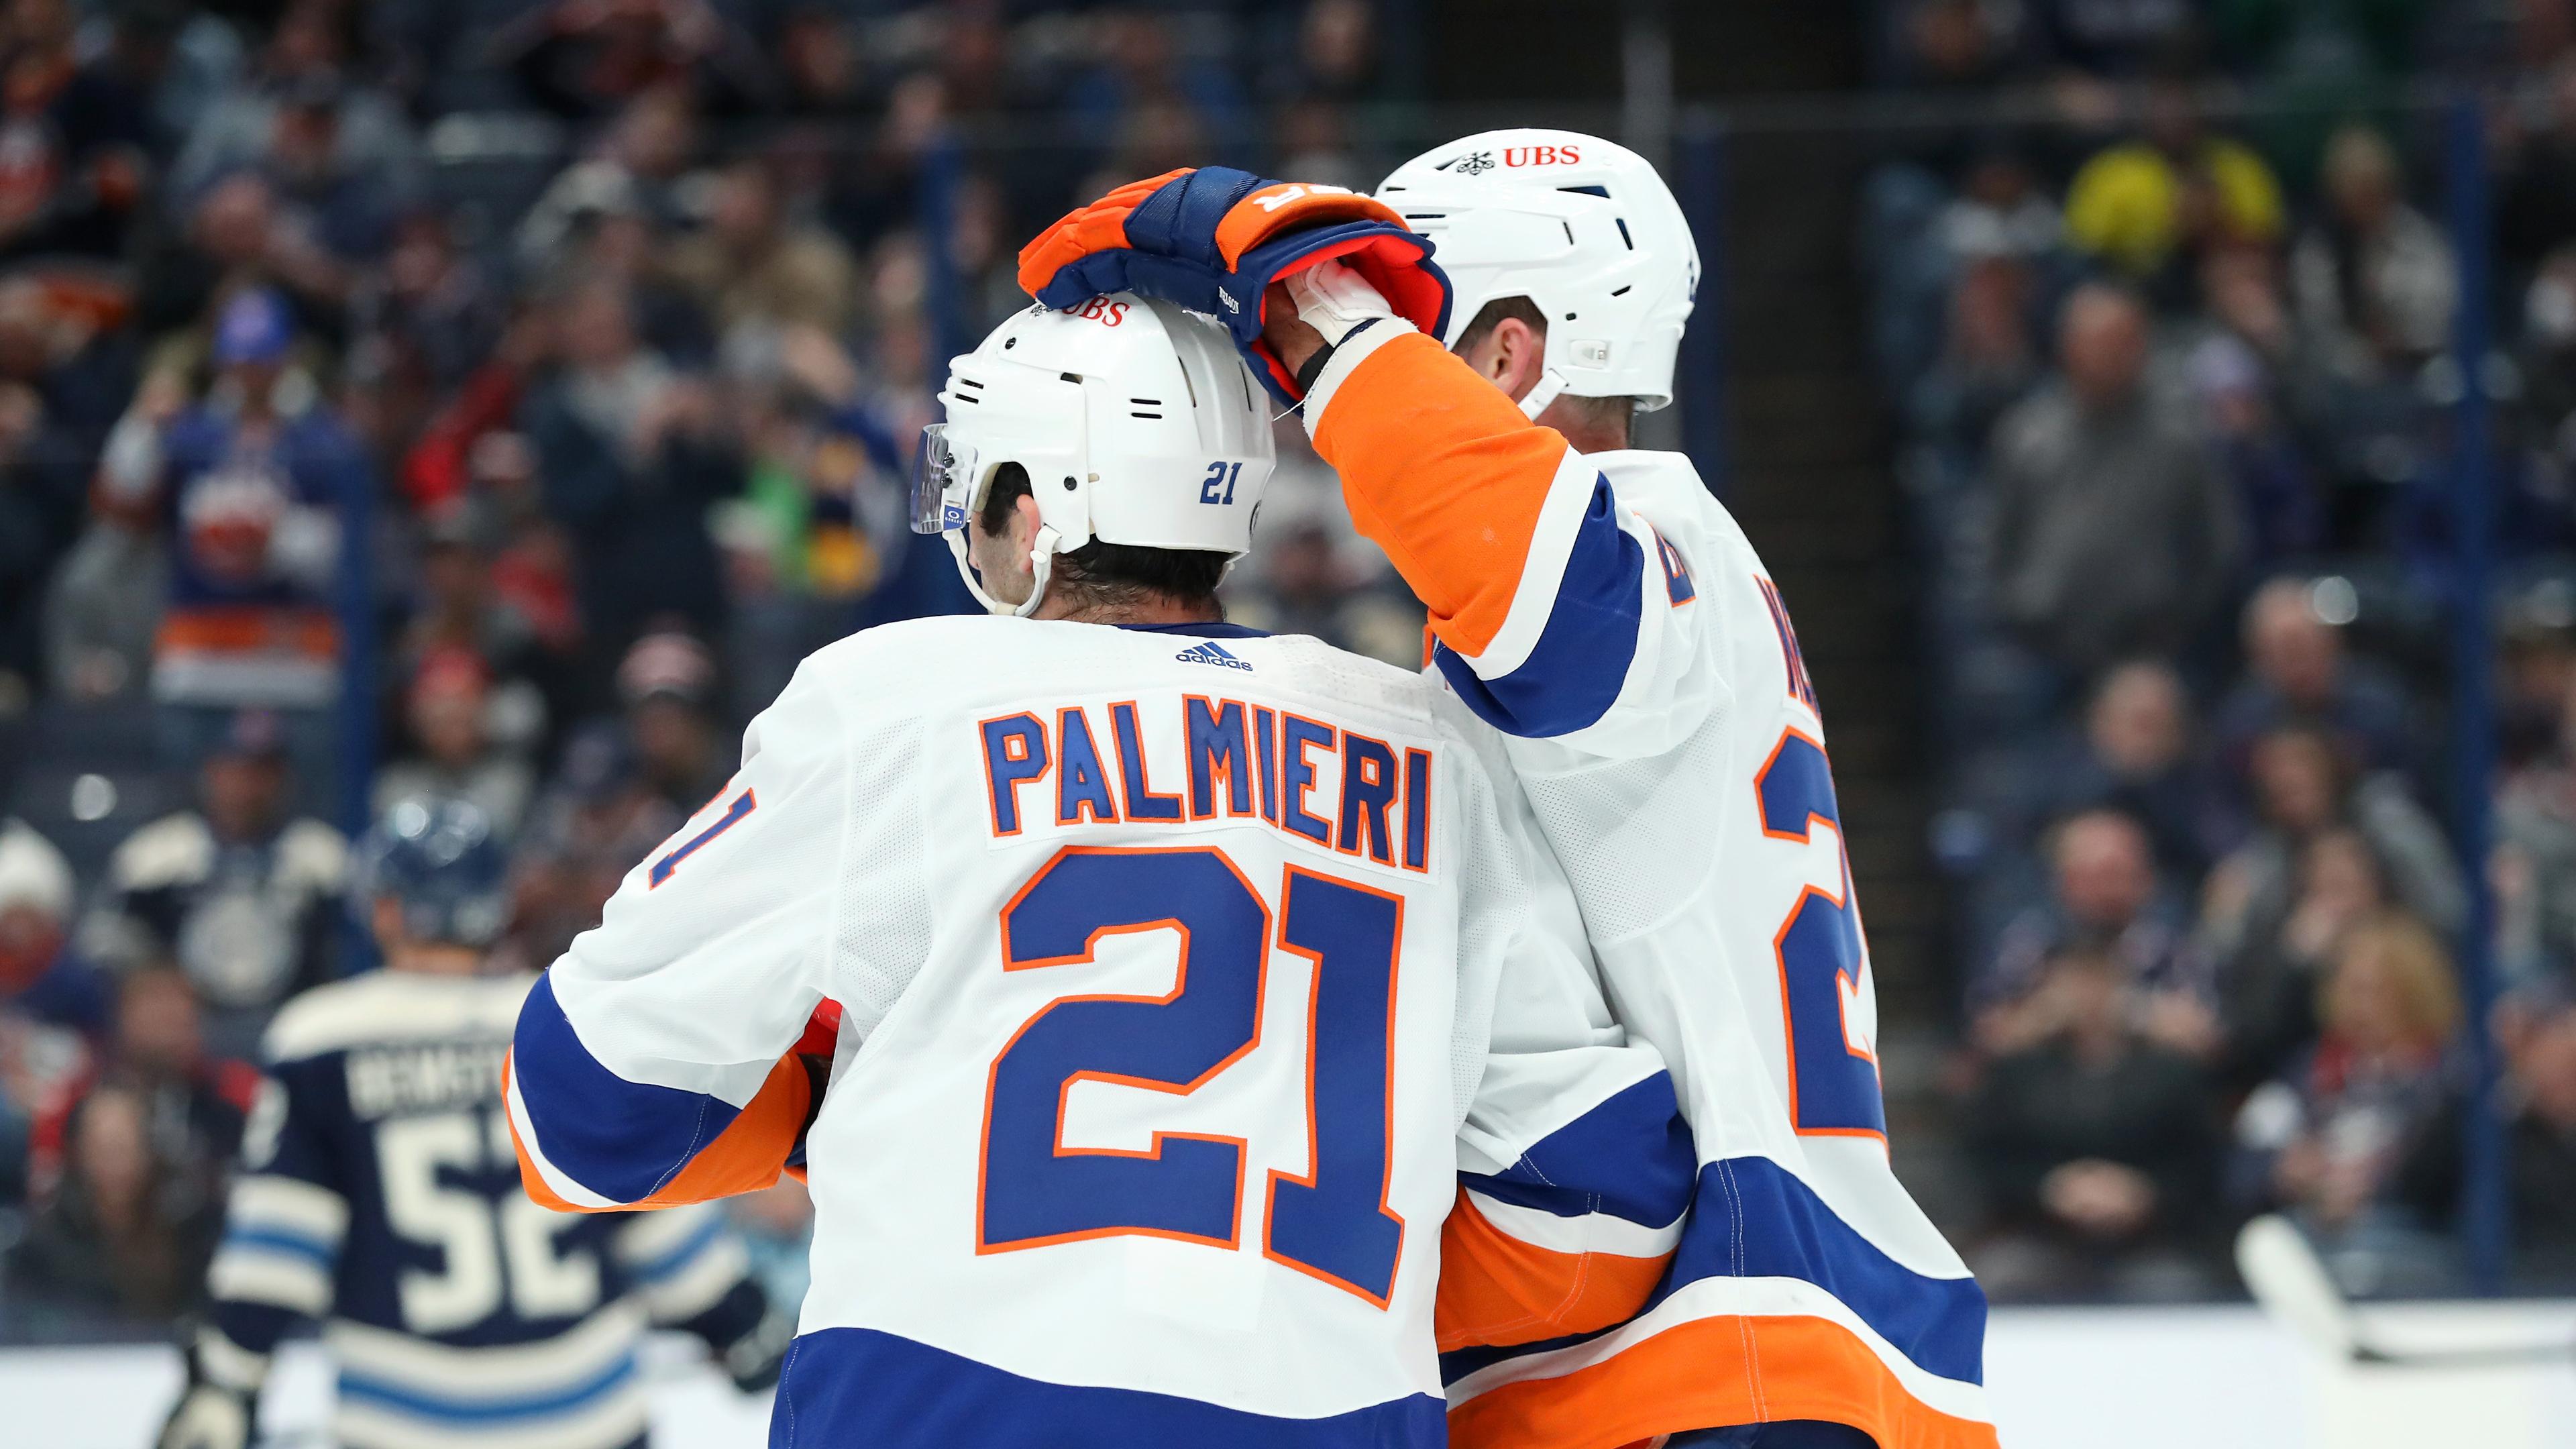 New York Islanders center Kyle Palmieri (21) celebrates his goal with center Brock Nelson (29) during the first period against the Columbus Blue Jackets at Nationwide Arena. / Joseph Maiorana-USA TODAY Sports